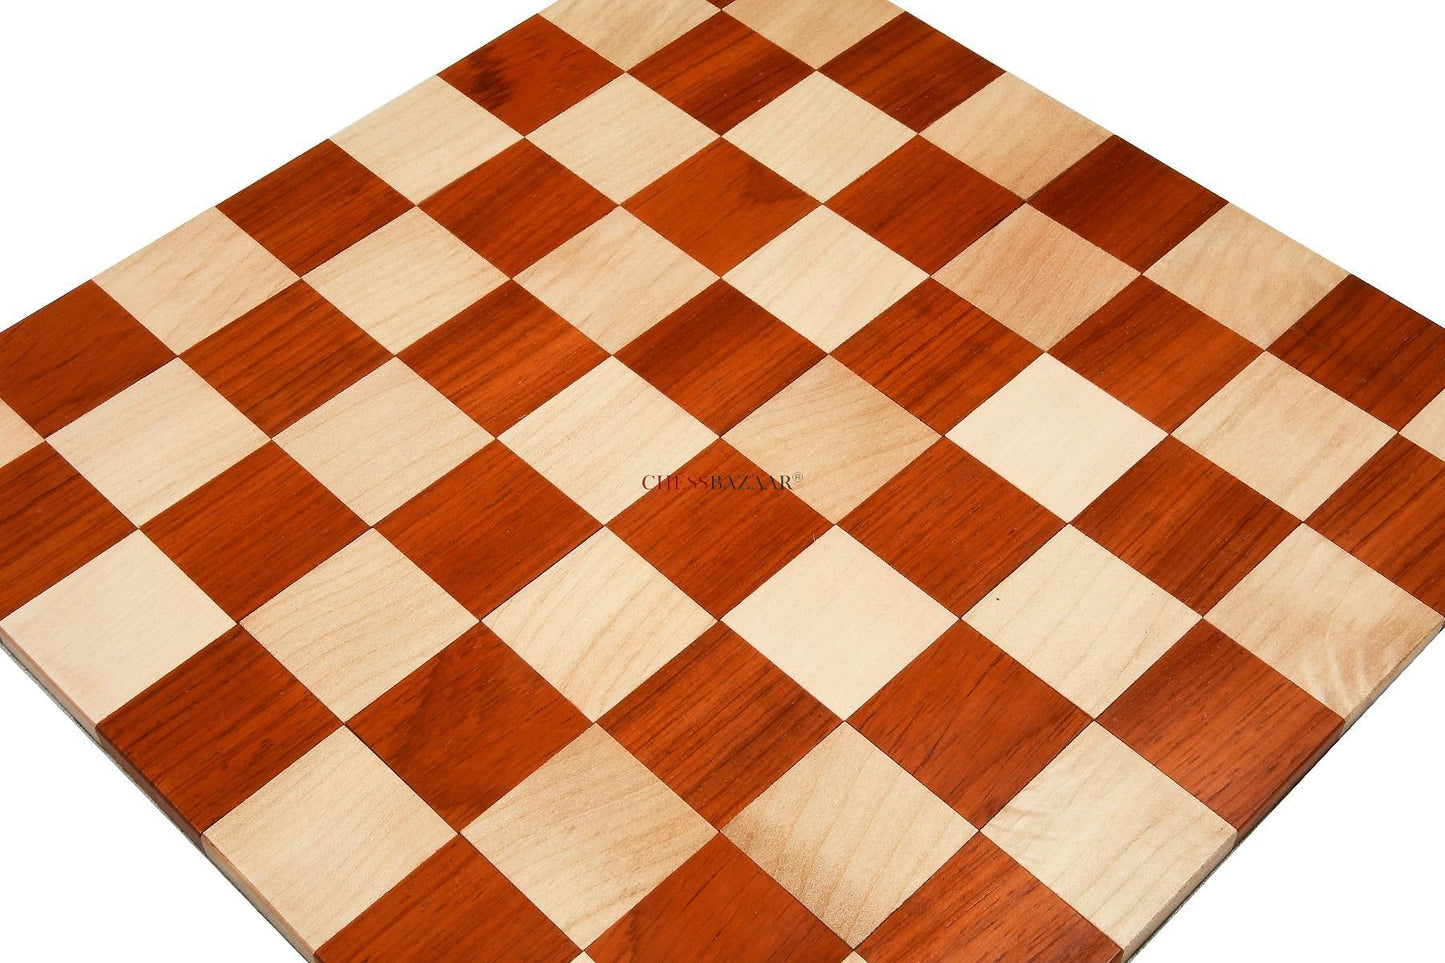 Folding Wooden Chess Board in Bud Rose Solid Wood (Padauk) & Maple Wood 12.8" - 40 mm Square